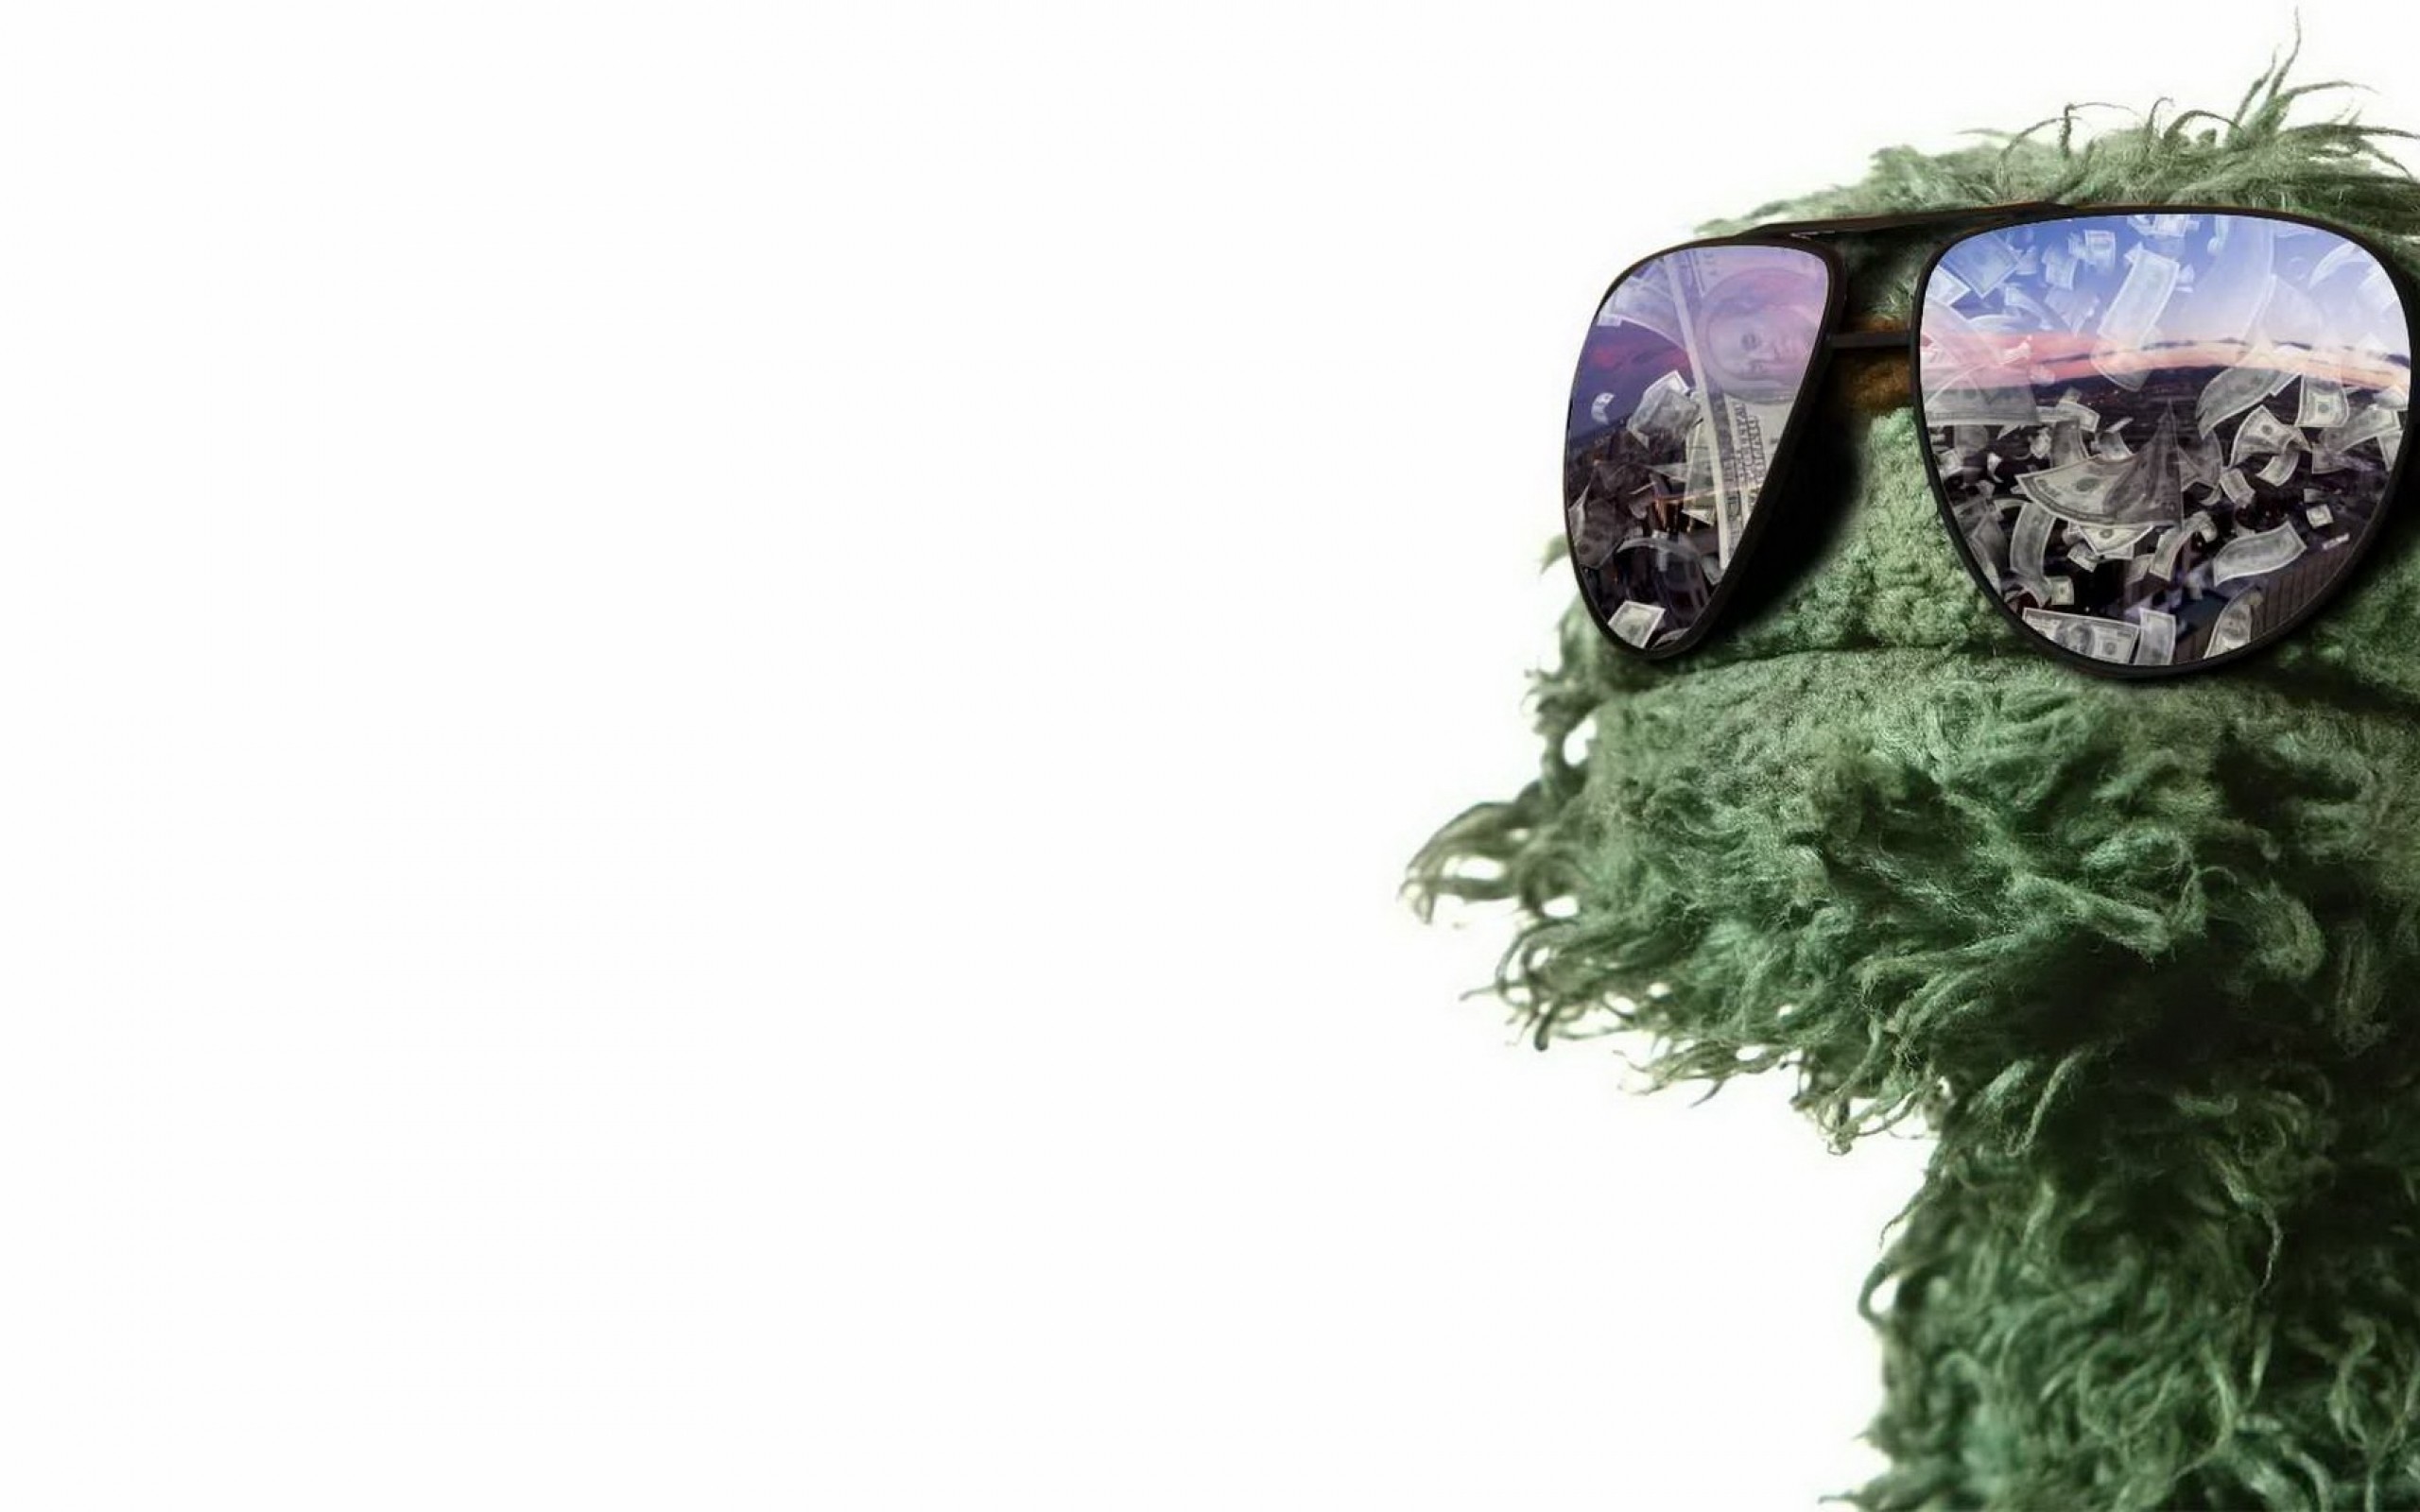 Oscar The Grouch Wallpaper Image